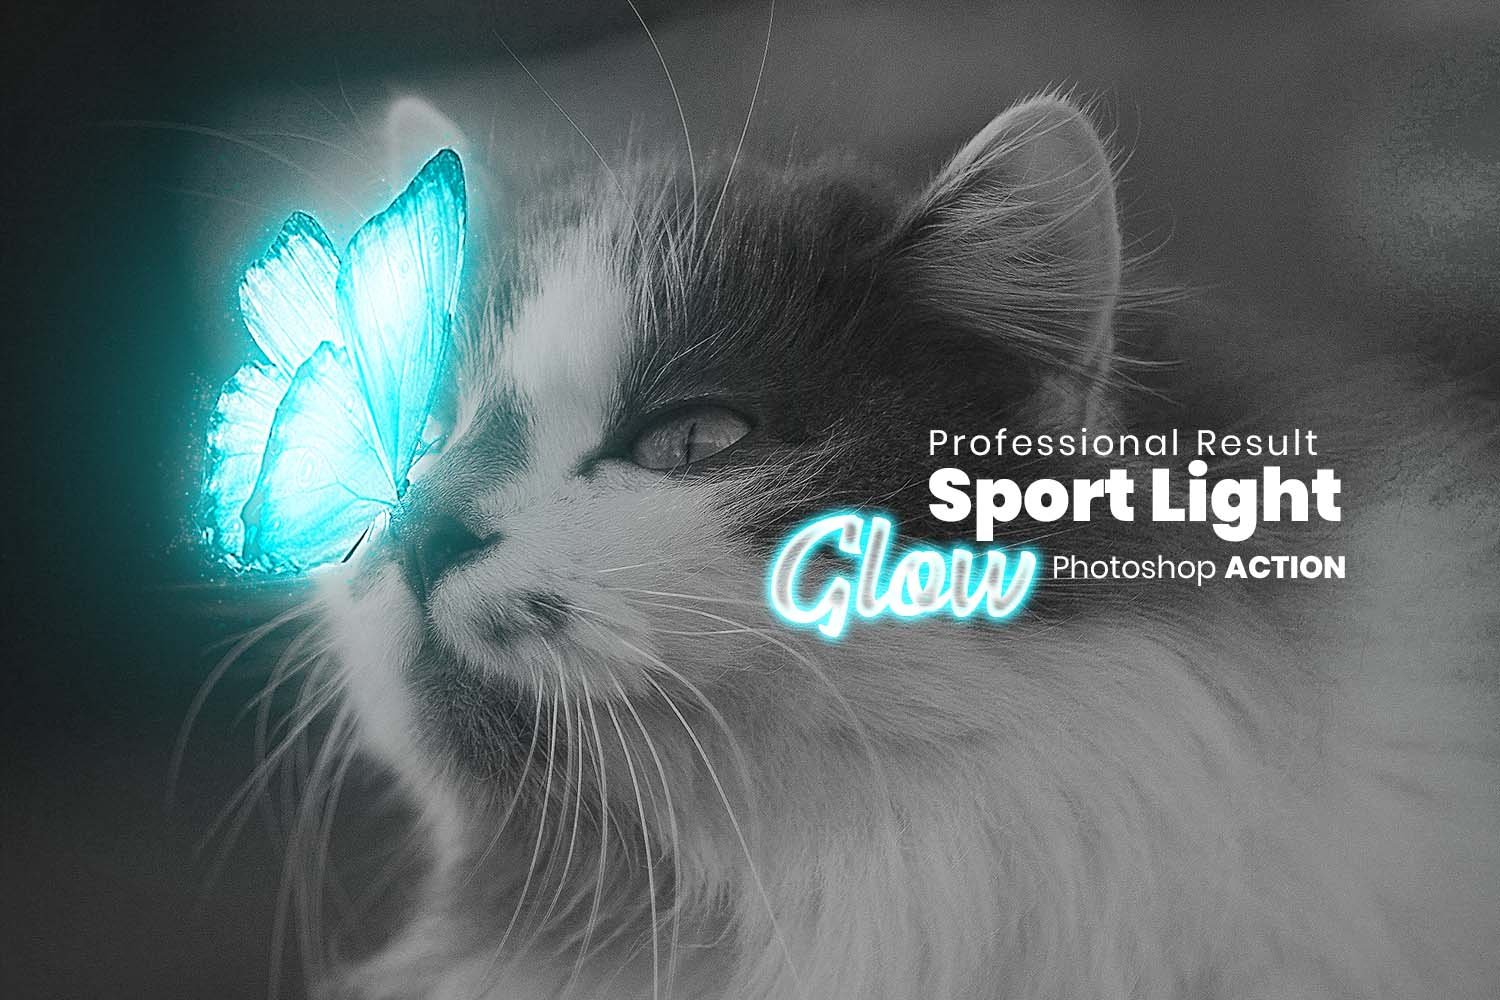 Sport Light Glow Photoshop Actioncover image.